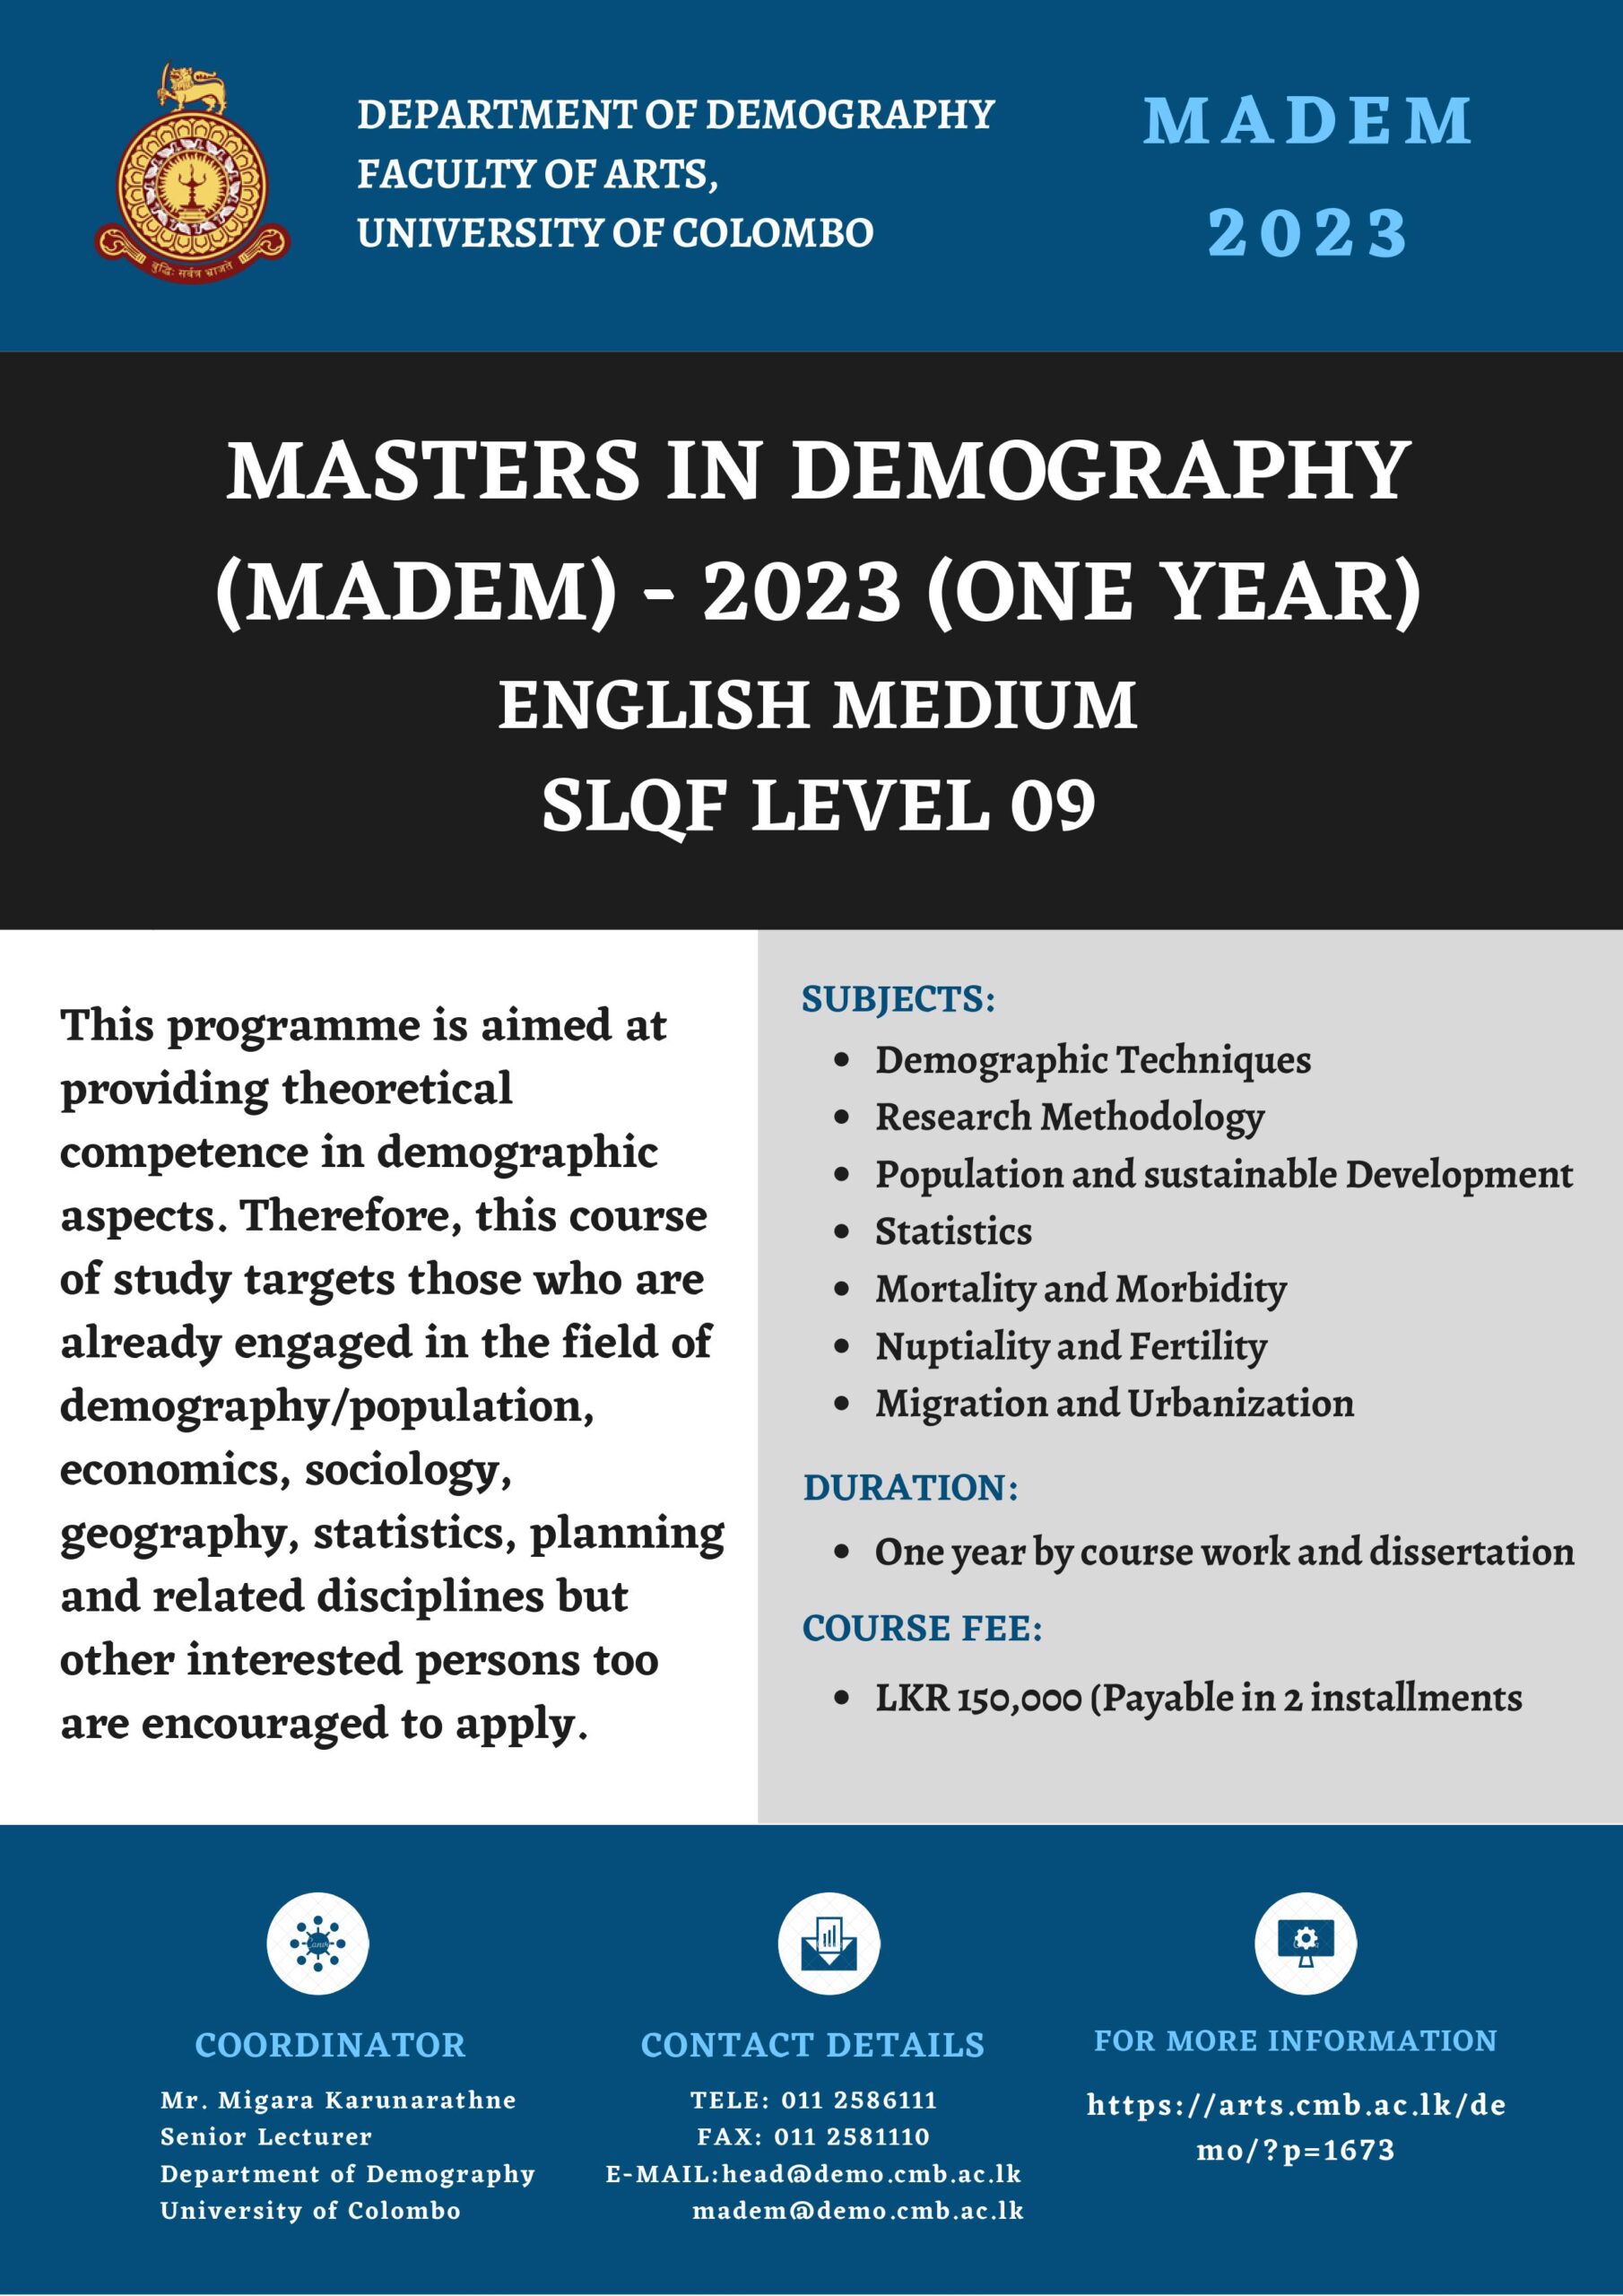 Study Programmes in Demography-2023